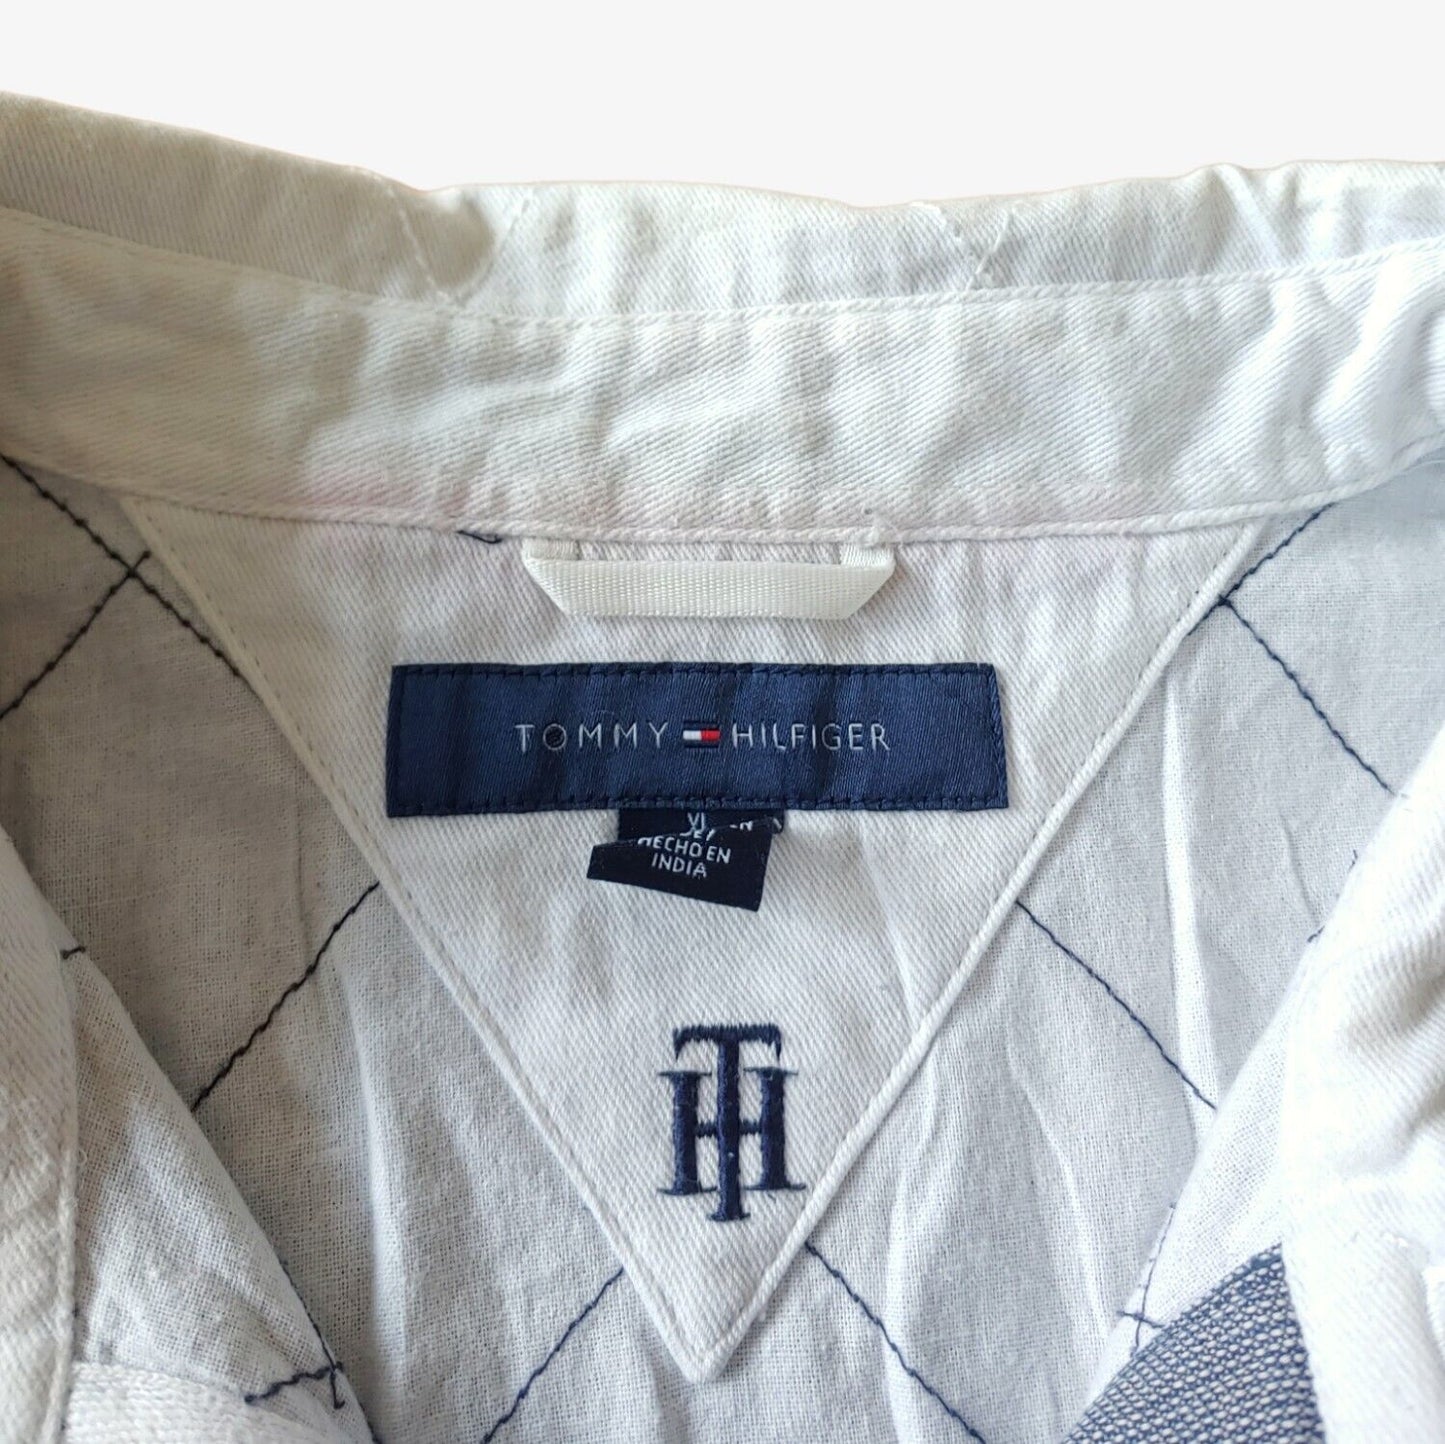 Vintage 90s Tommy Hilfiger Spell Out Navy Short Sleeve Rugby Shirt Label - Casspios Dream